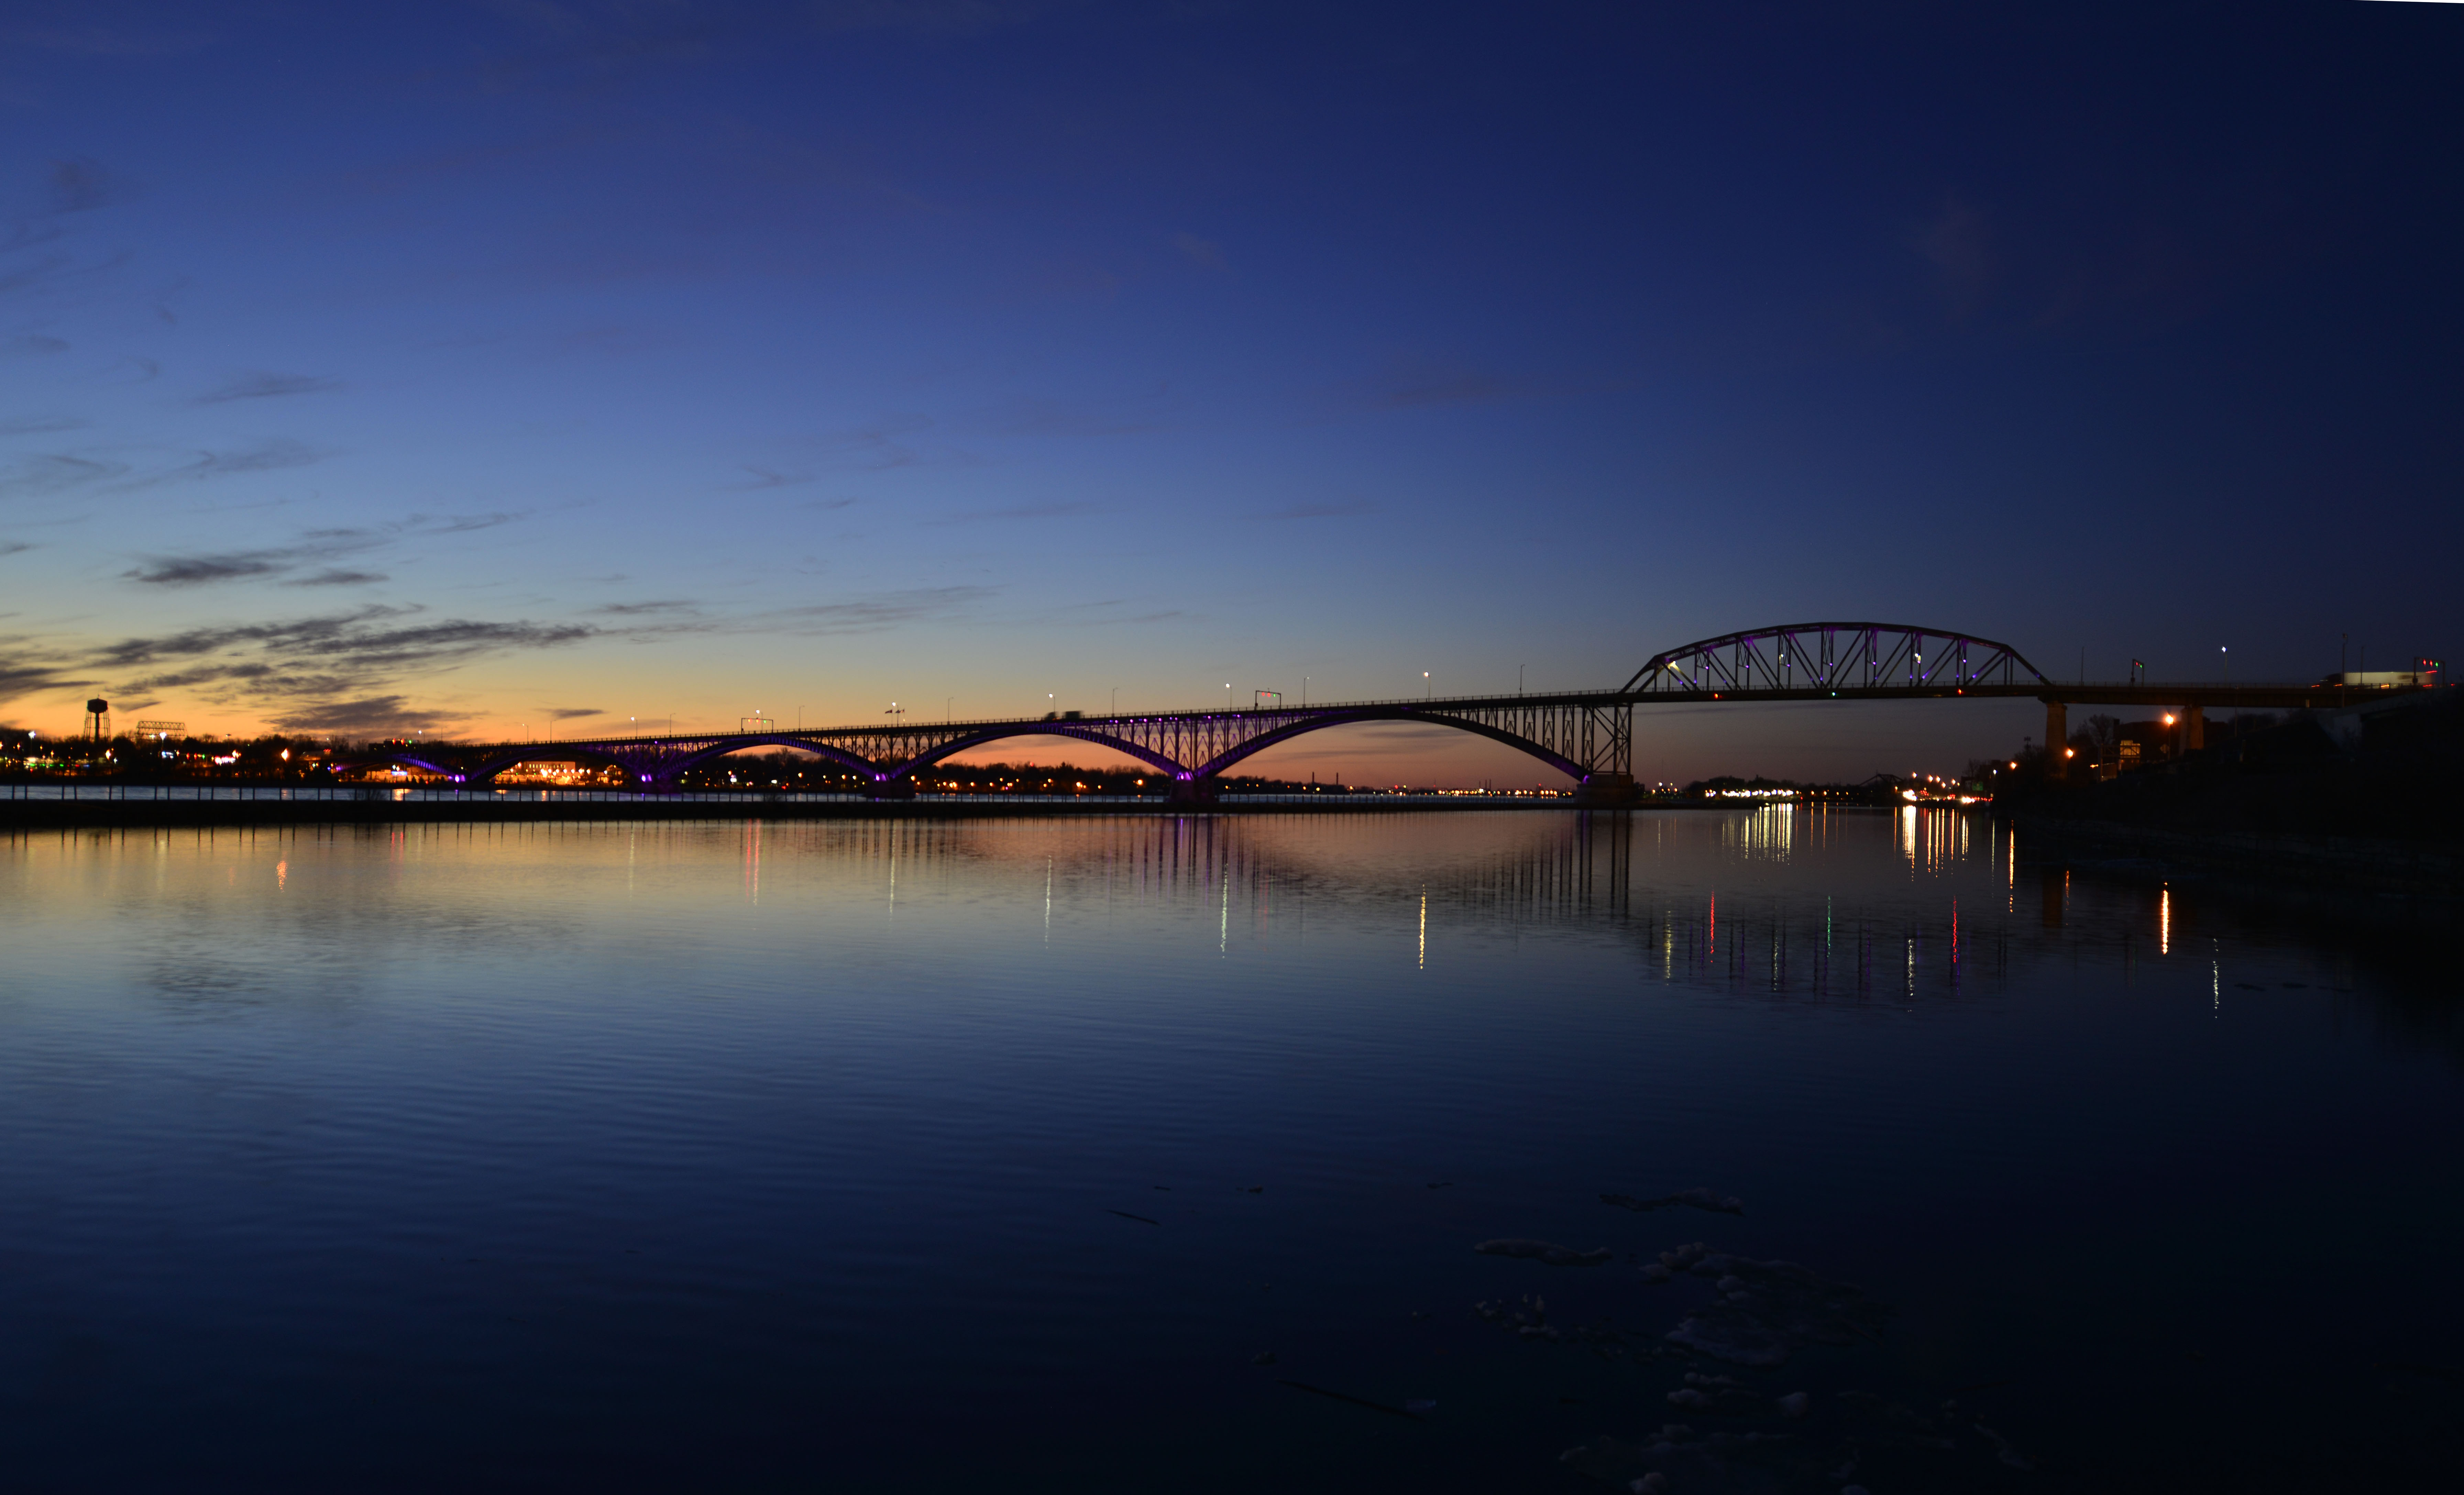 The Peace Bridge, an international bridge between Canada and the United States, displays purple lights as part of the Purple Up! campaign to show support and recognize the sacrifices and strength of military children, April 15, 2015. (U.S. Air Force photo by Tech. Sgt. Stephanie Sawyer)   